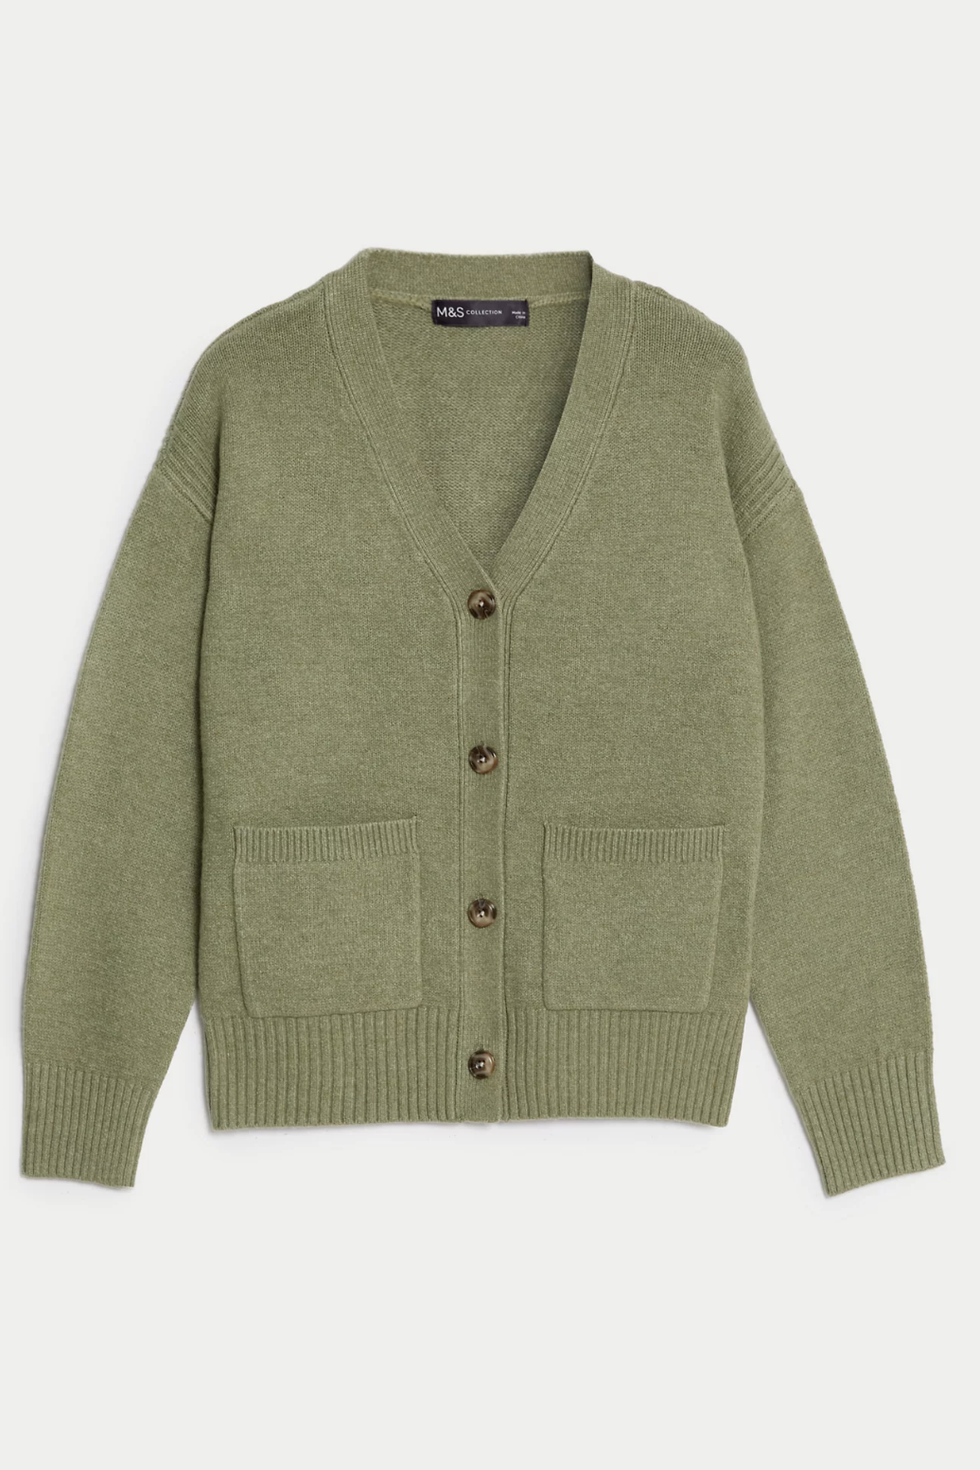 Best cardigans UK: 15 cardigans for women to shop in 2023